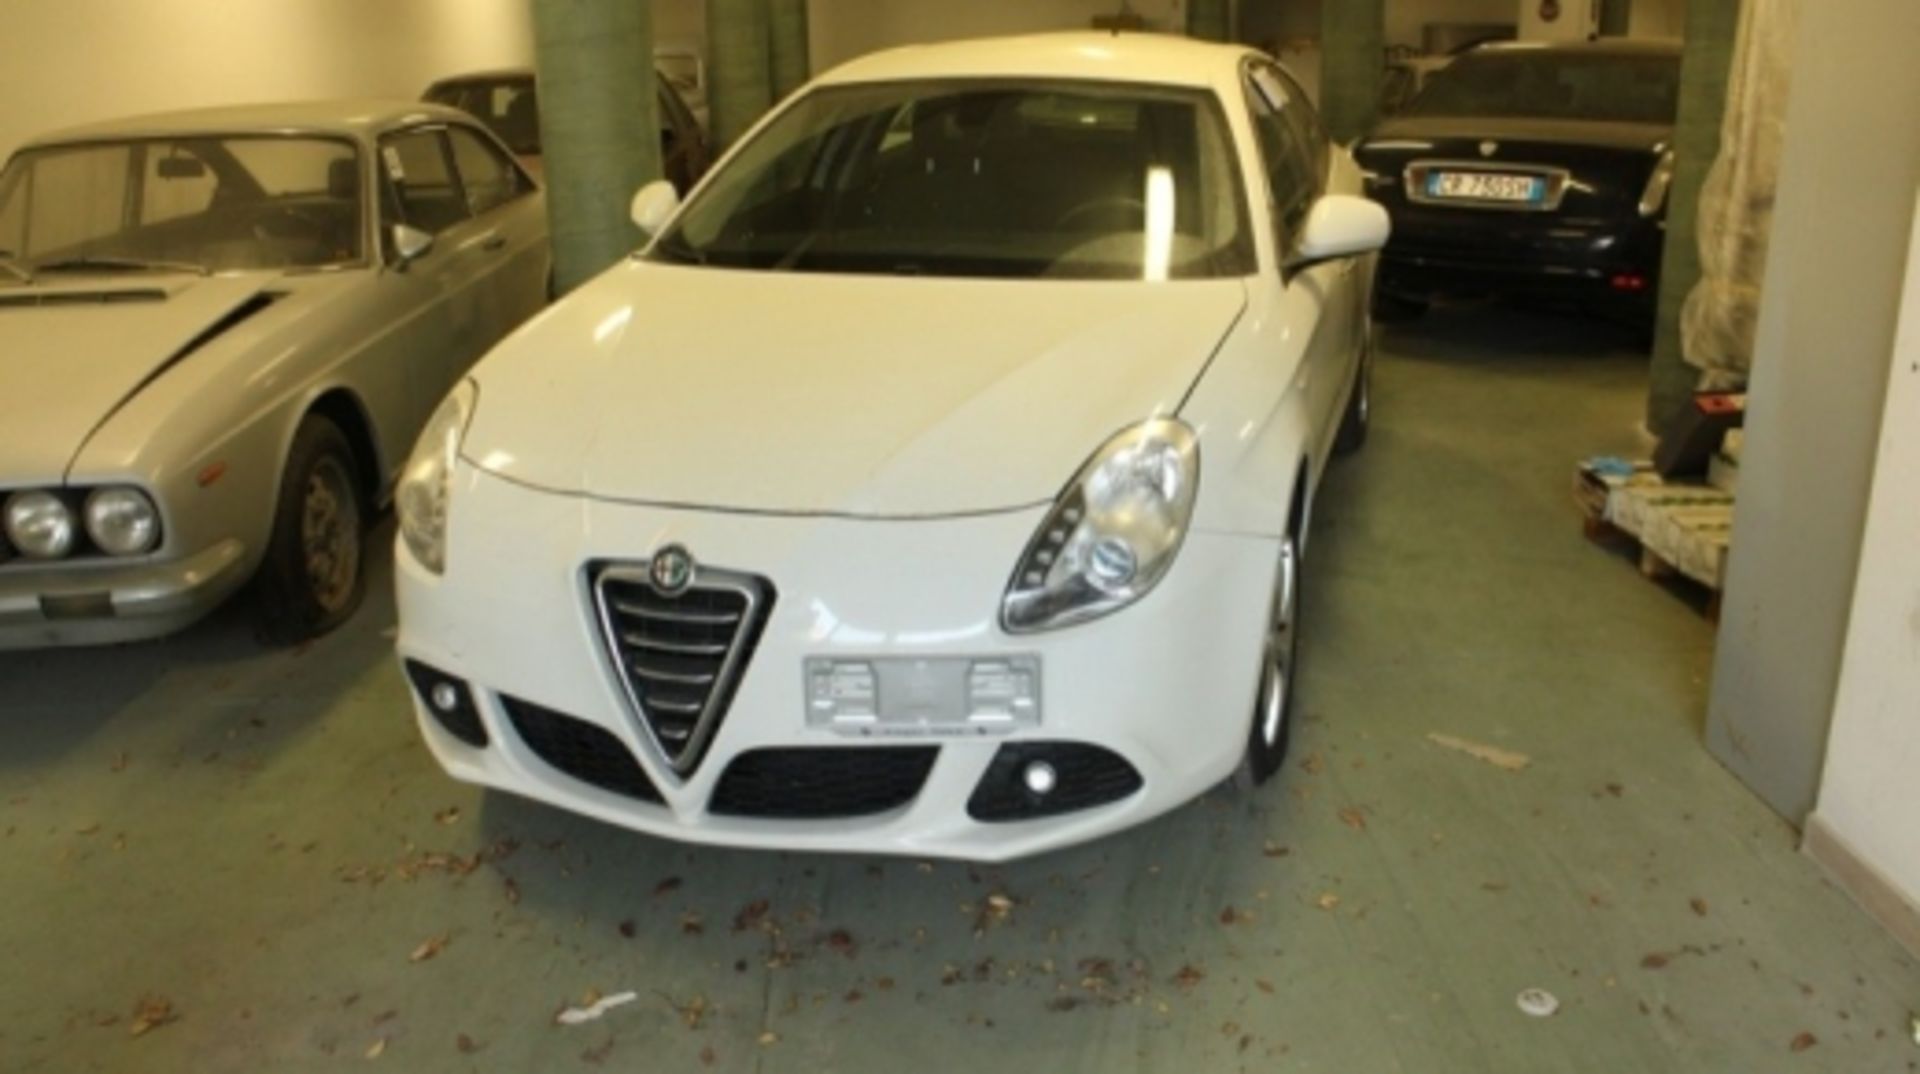 1,Giulietta Alfa Romeo car plate n.  8984HLK diesel, about  50.000/60.000 km. without keys Click - Image 3 of 4